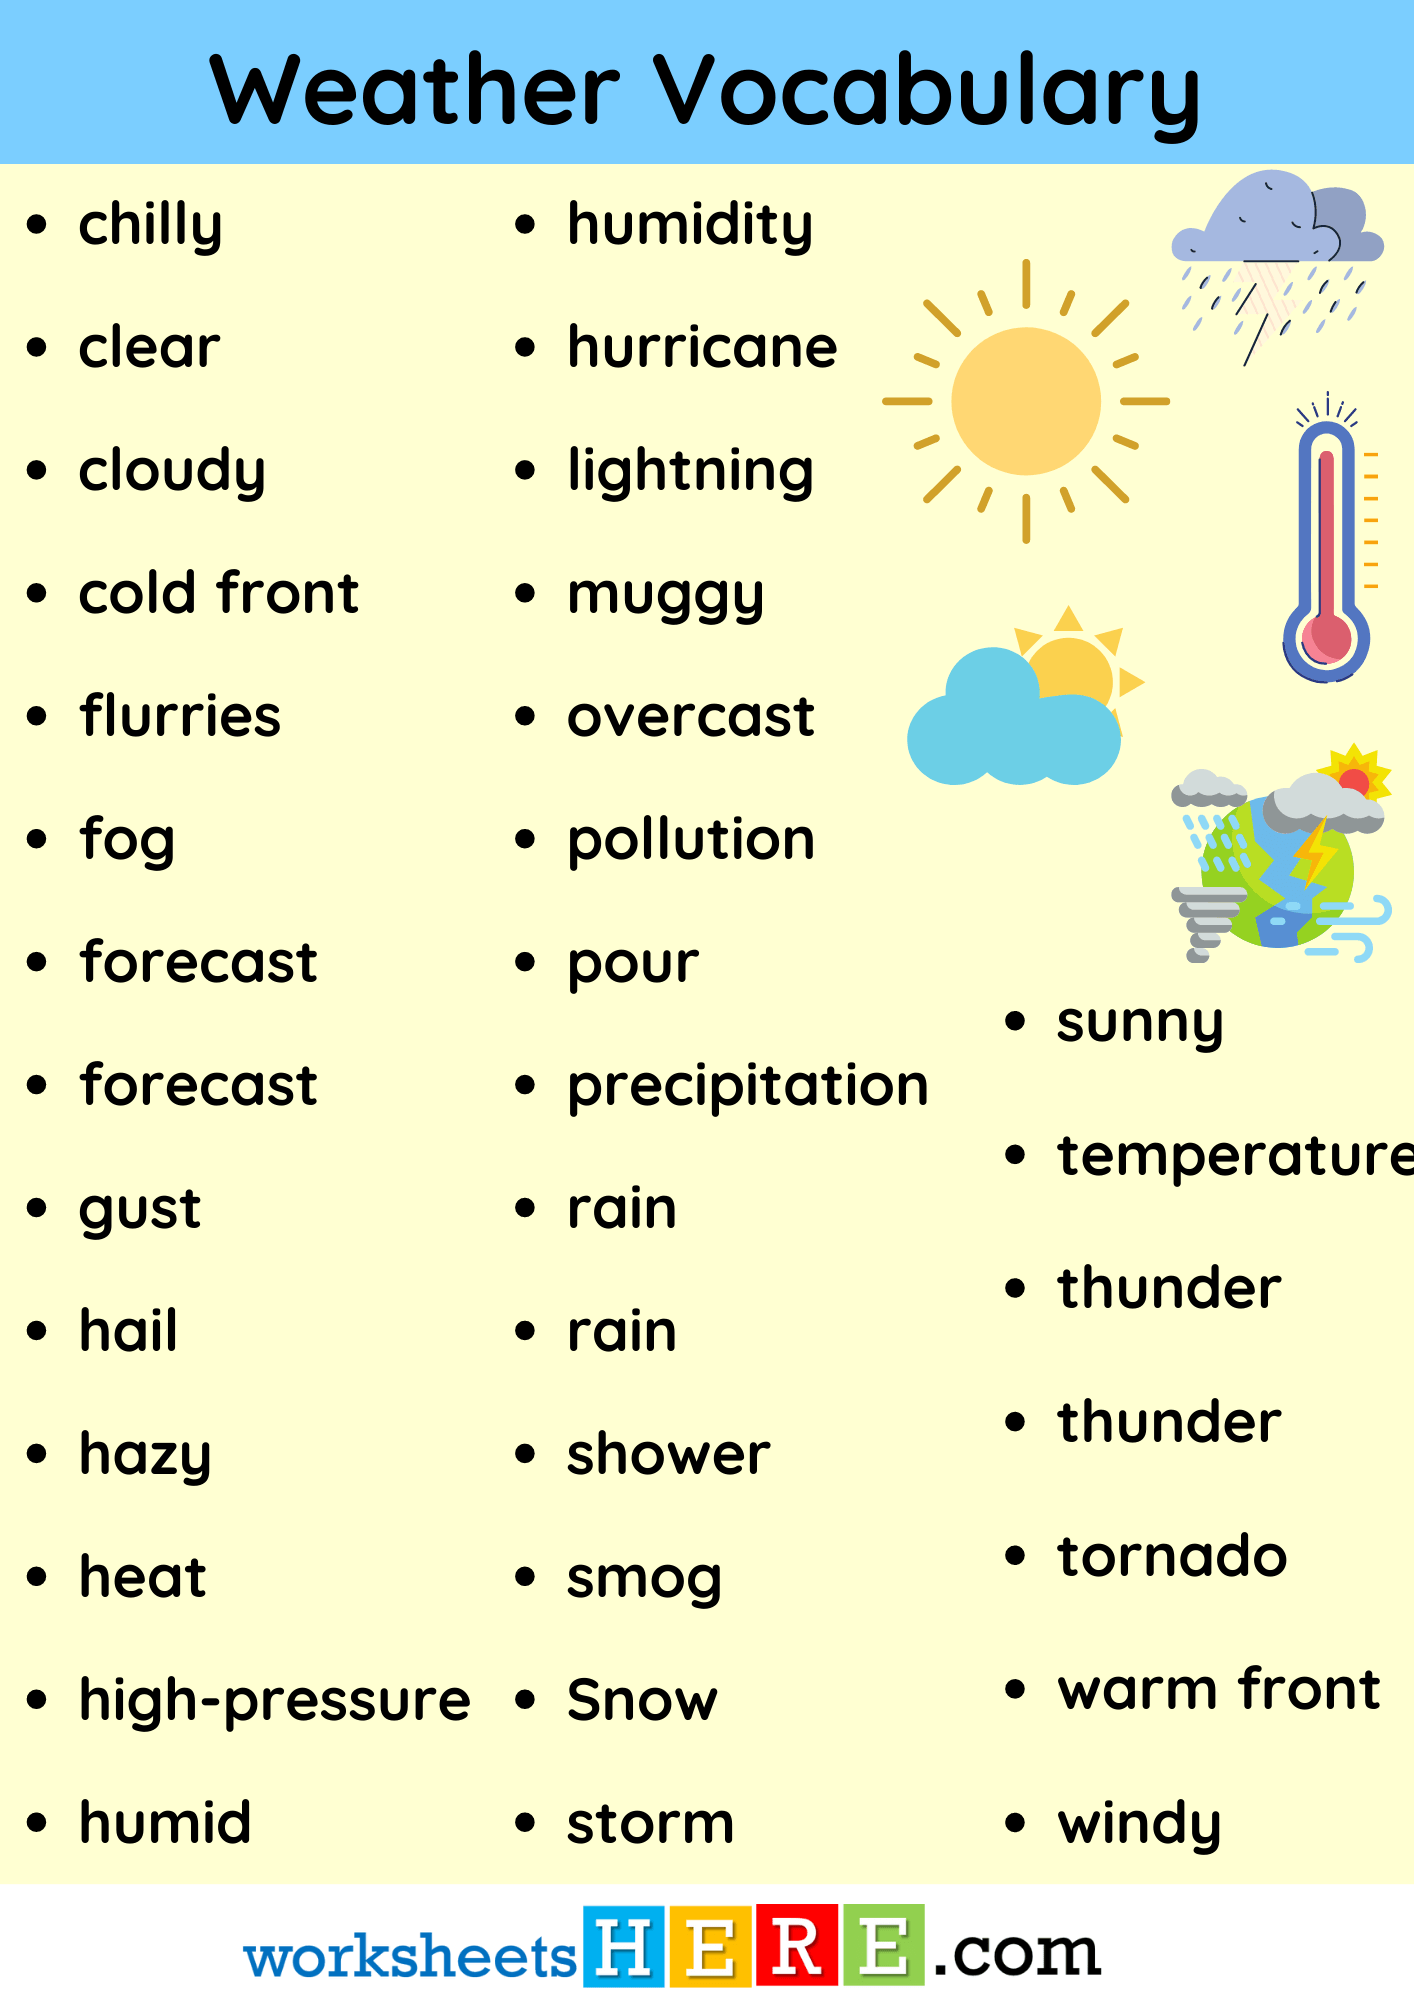 Weather Vocabulary List PDF Worksheet For Students and Kids